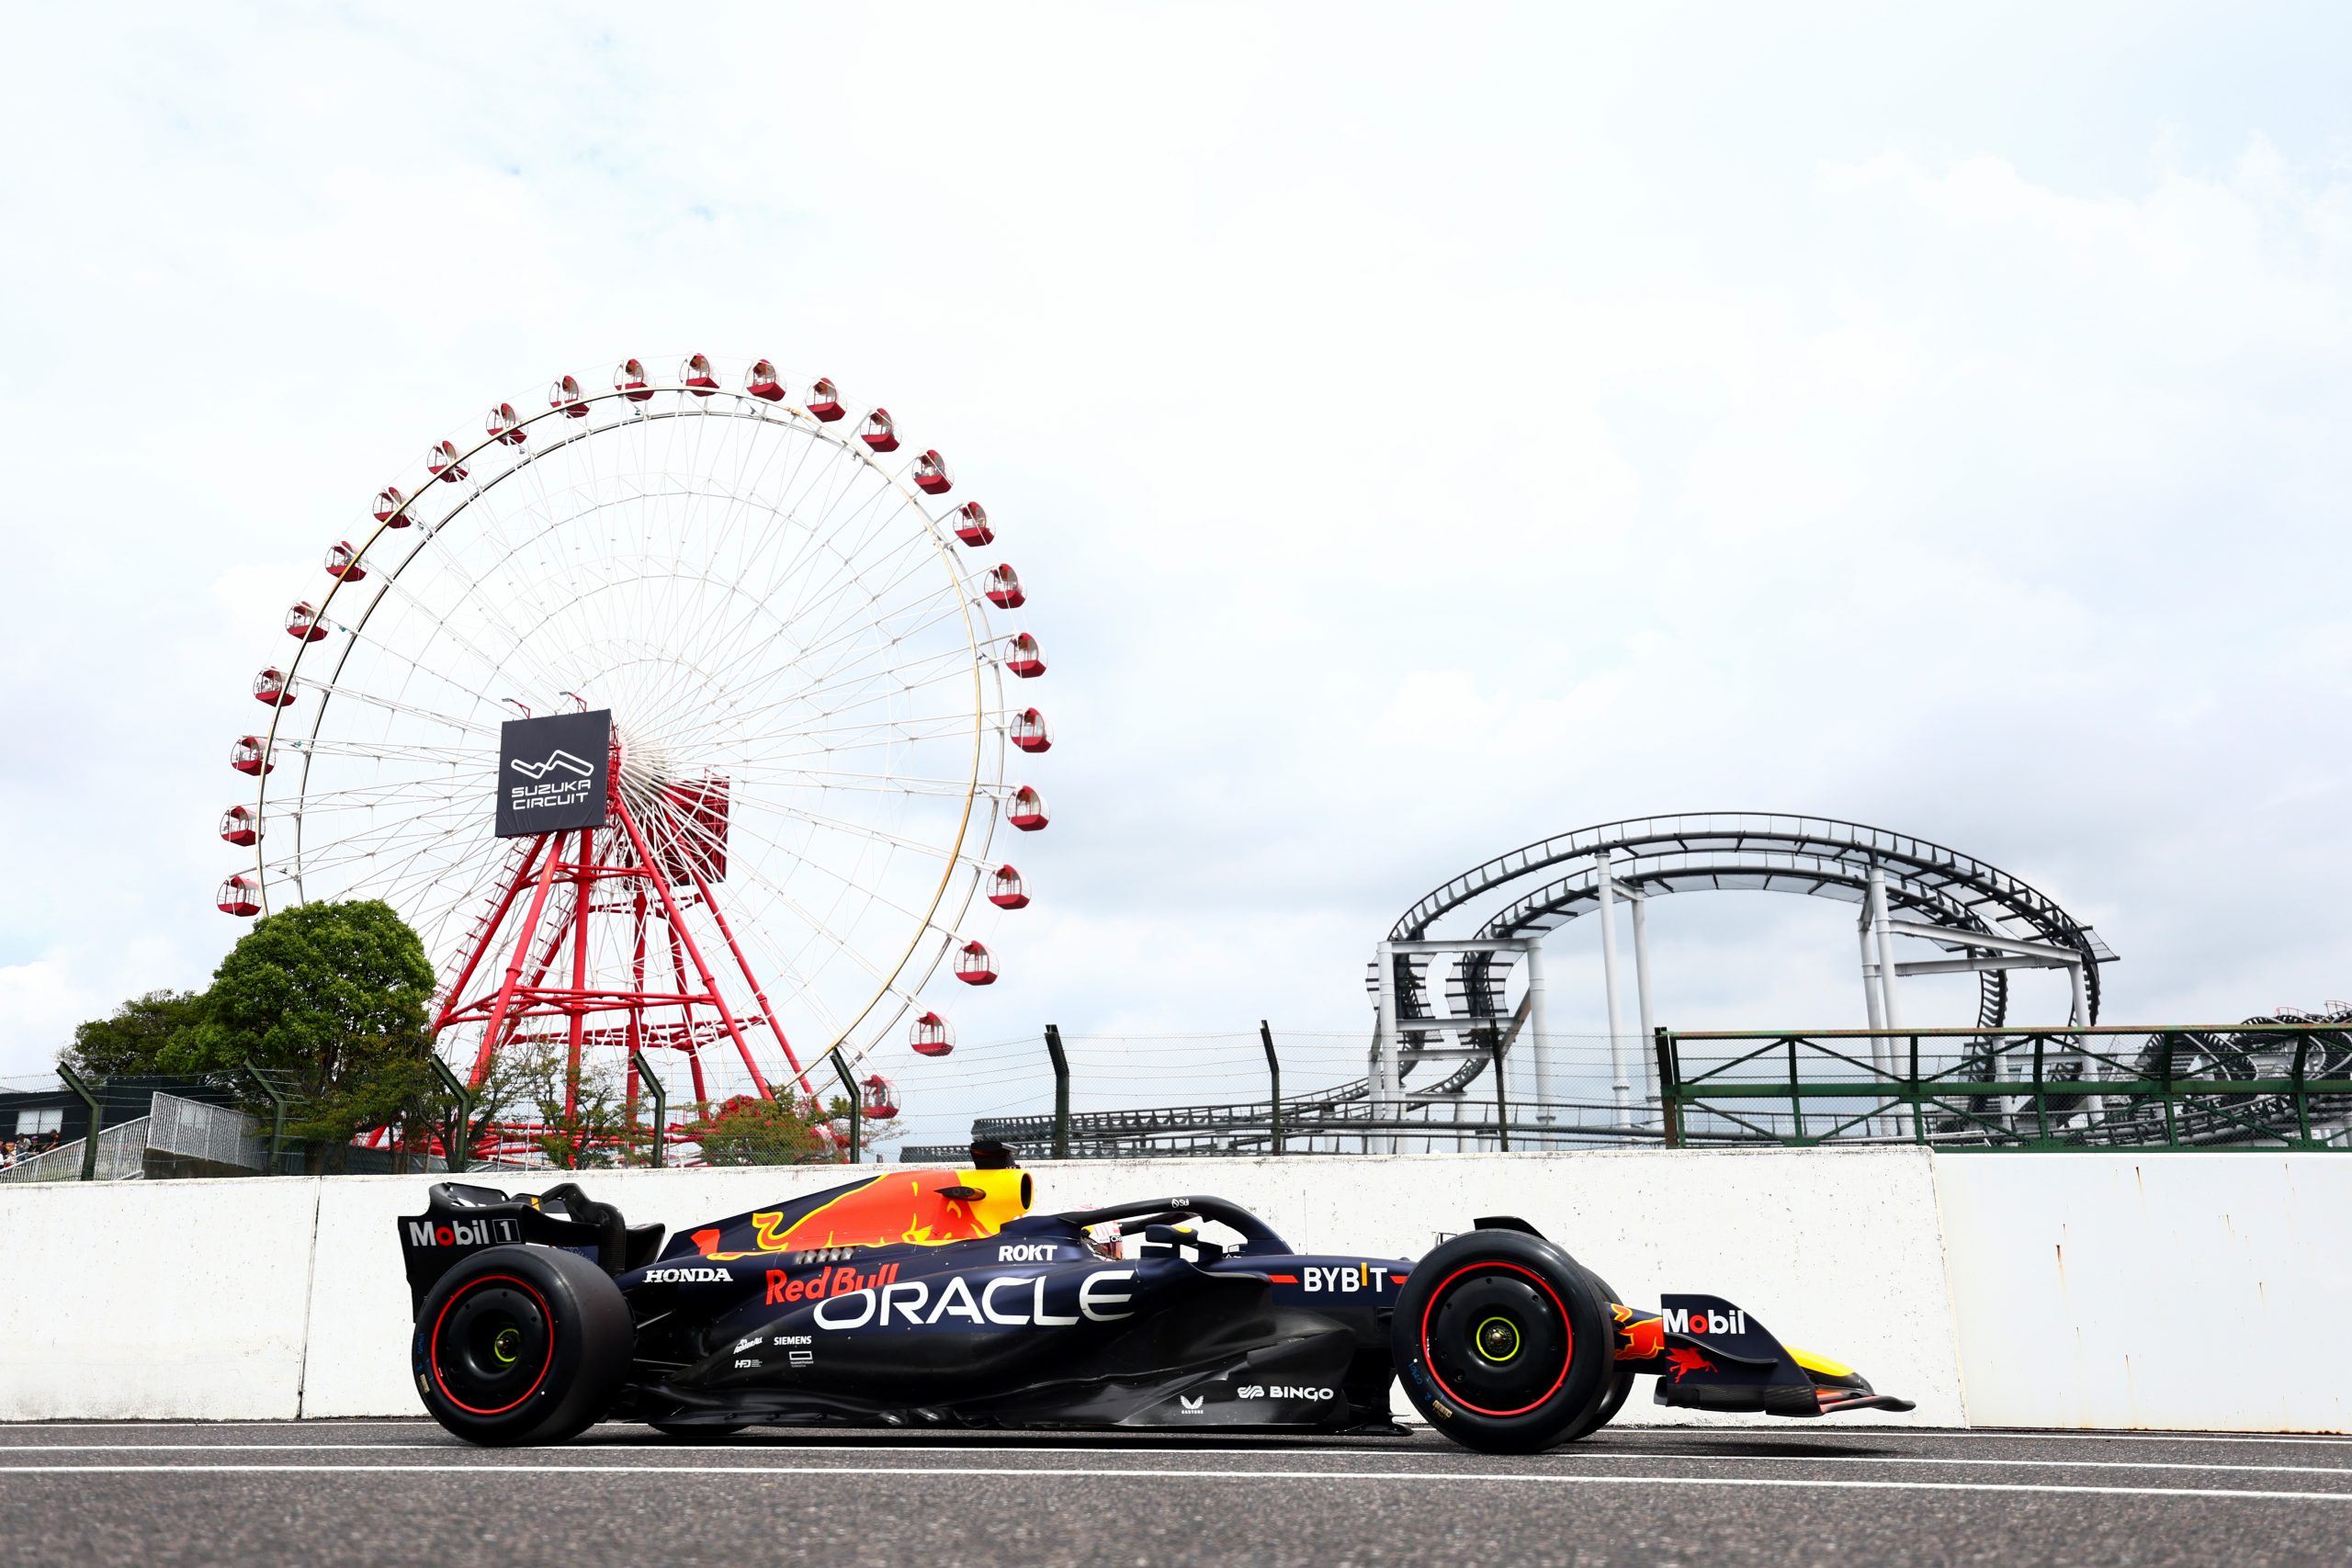 Max Verstappen (1) in his Red Bull looking to return to form at the Suzuka International Racing Course for Practice at the Formula 1 Japanese Grand Prix